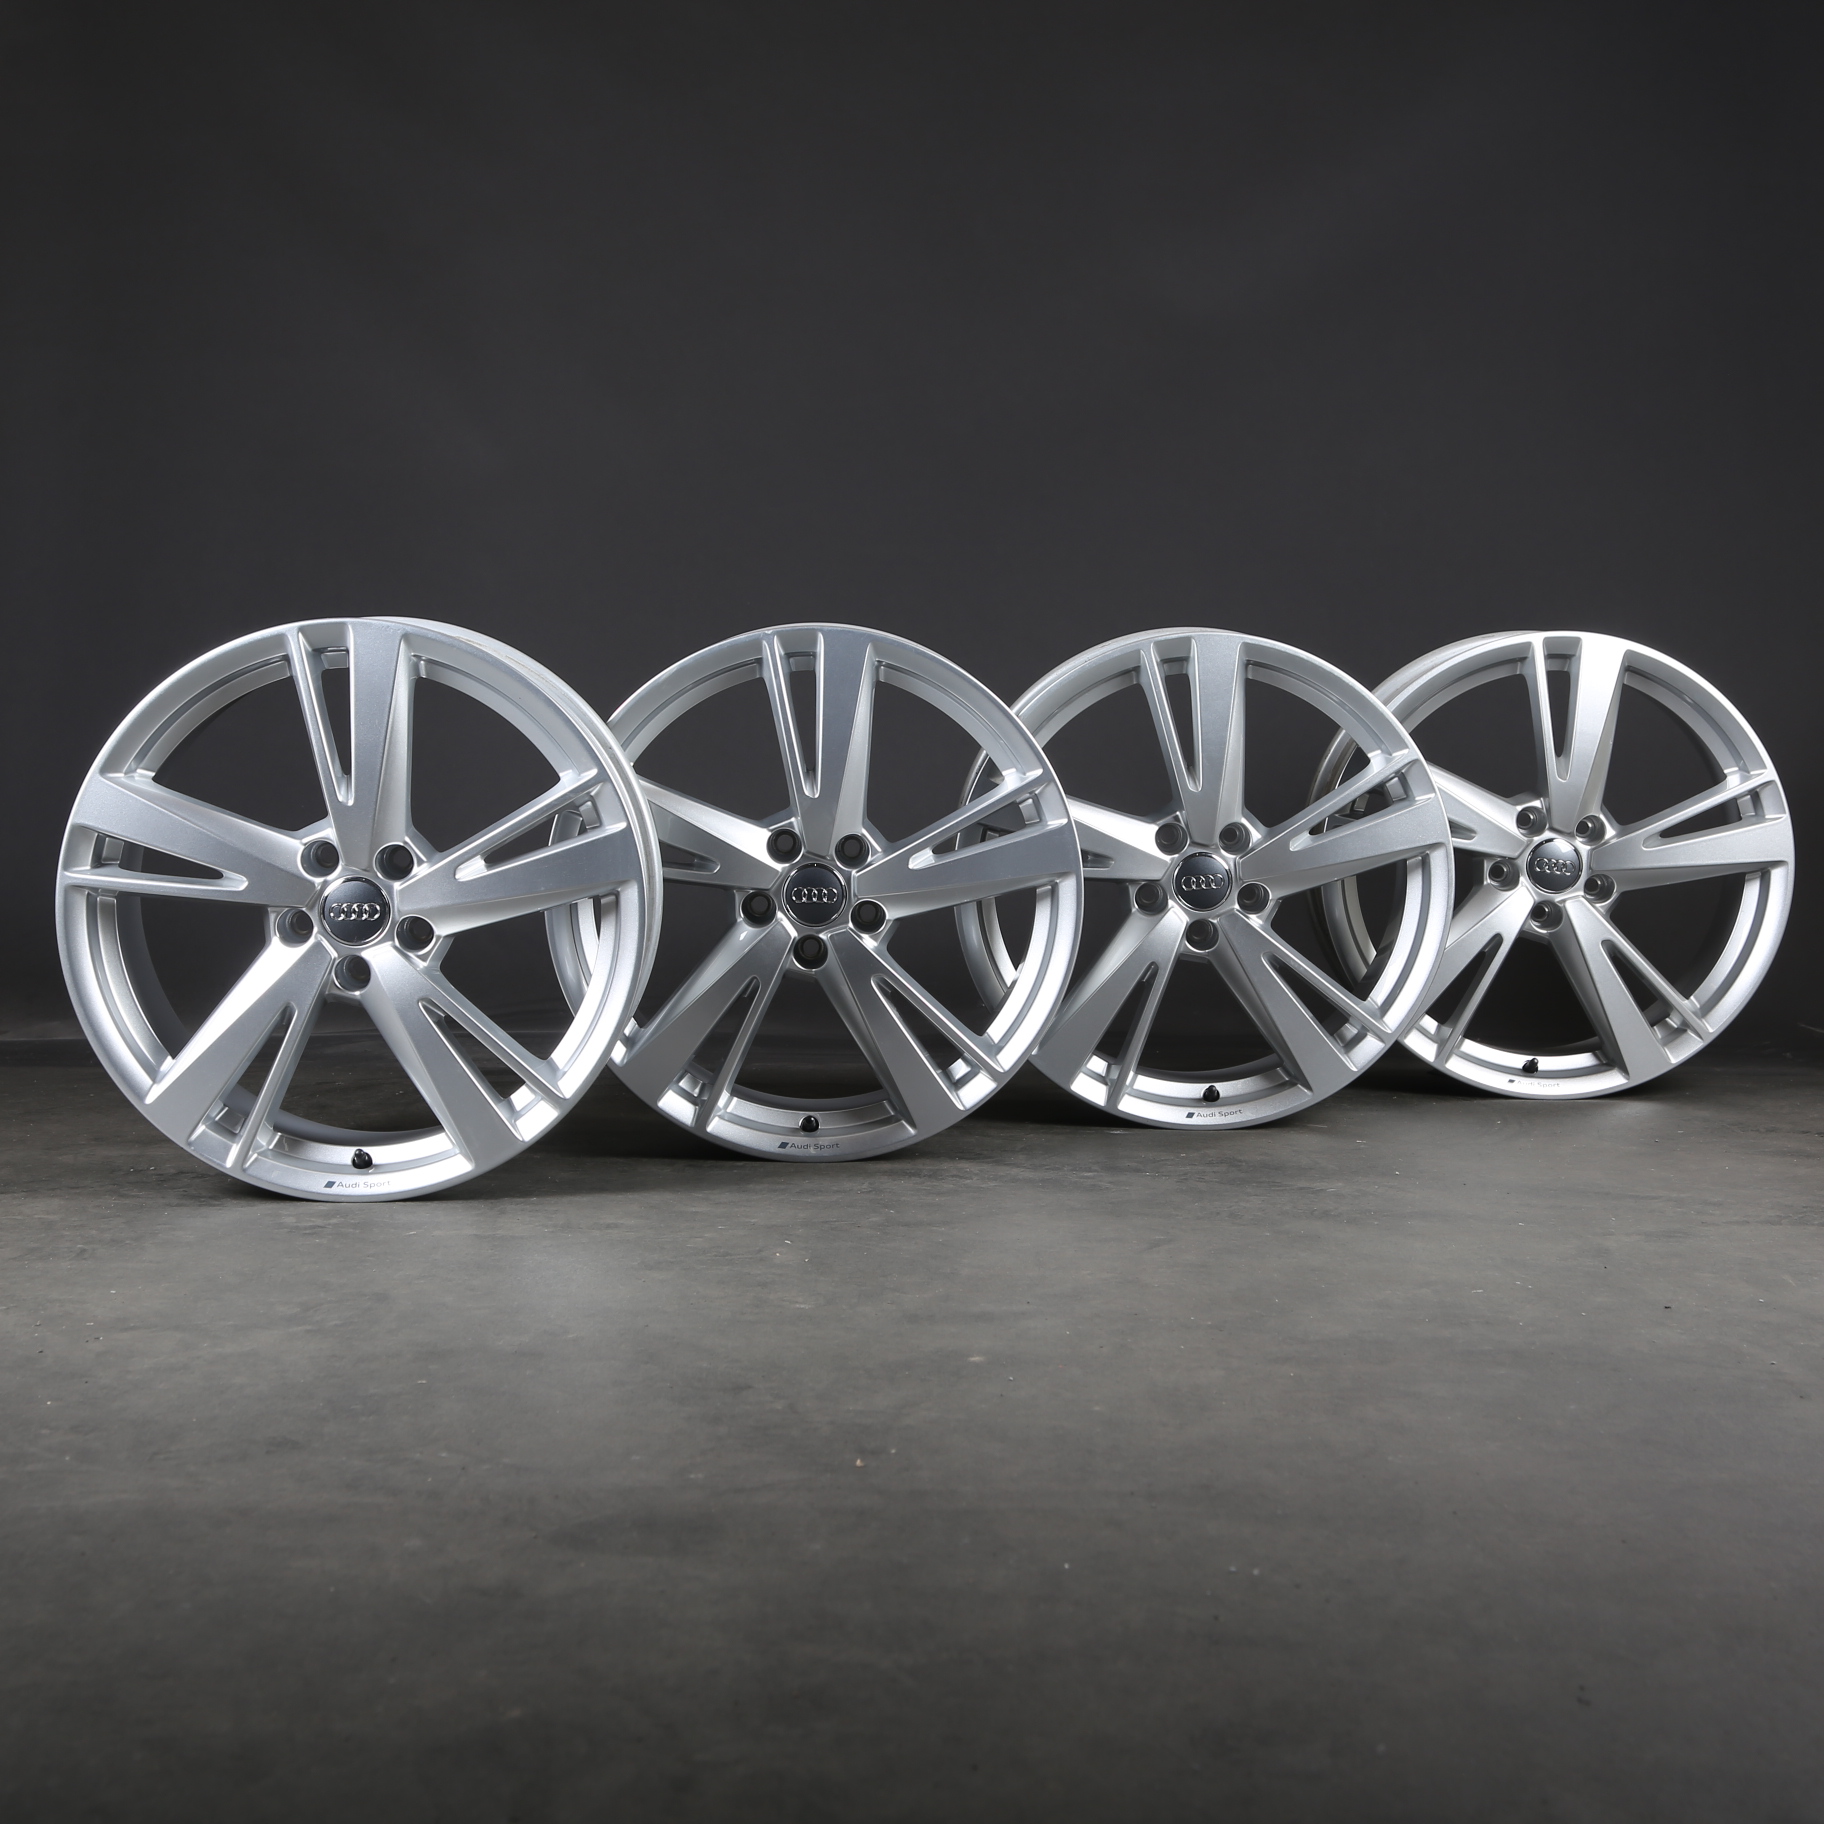 ▷ Original rims and complete wheels for Audi A3/S3 8V